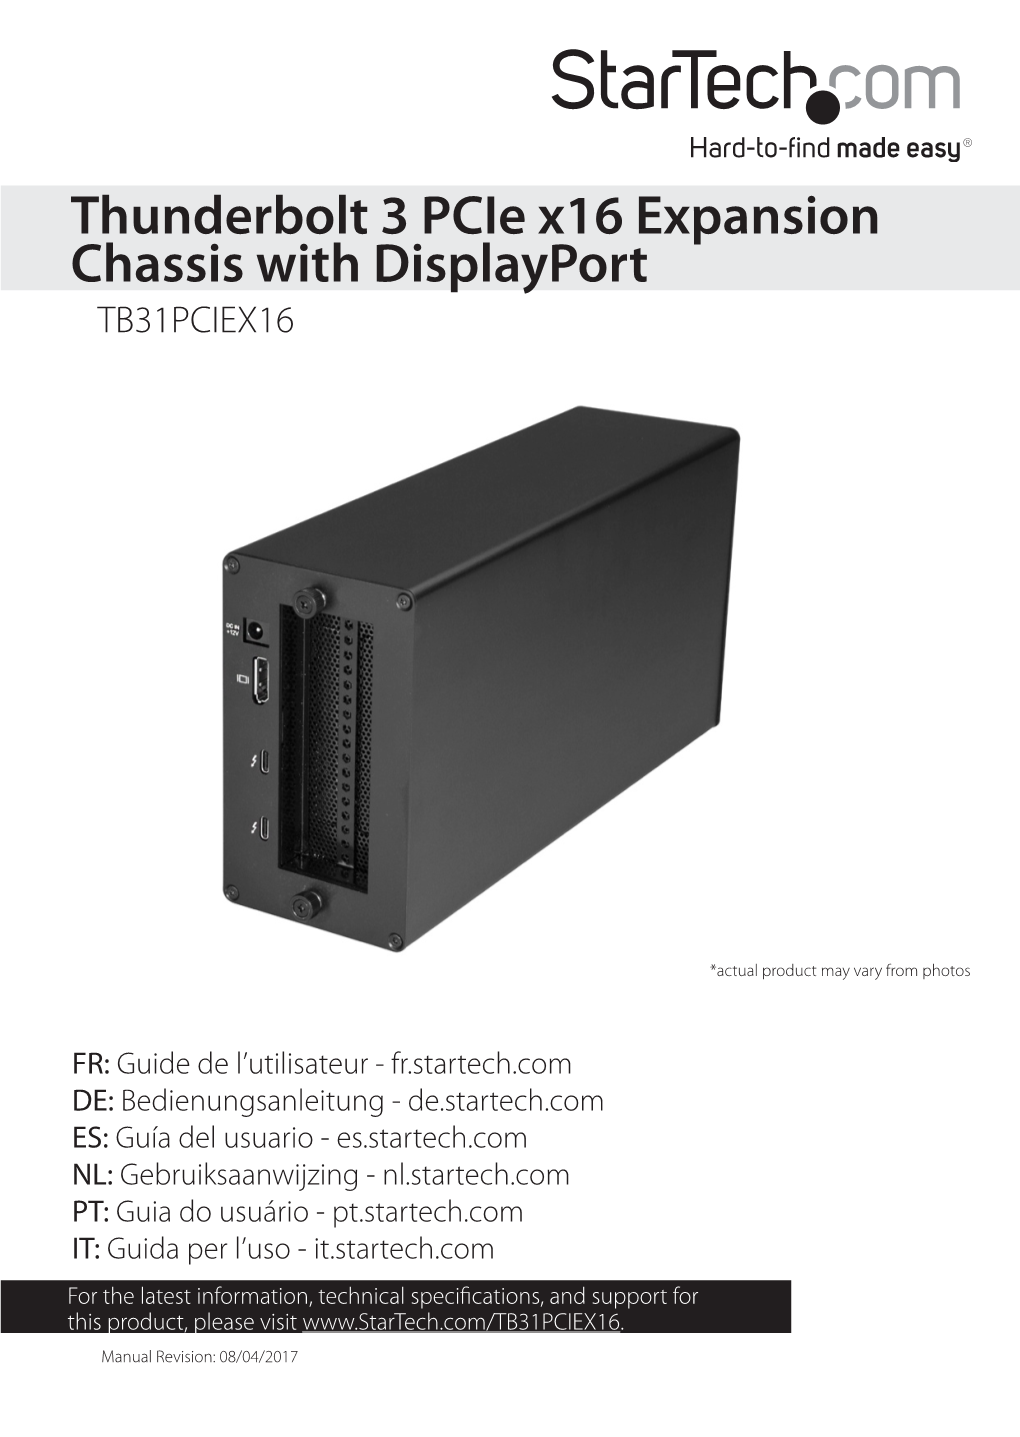 Thunderbolt 3 Pcie X16 Expansion Chassis with Displayport TB31PCIEX16